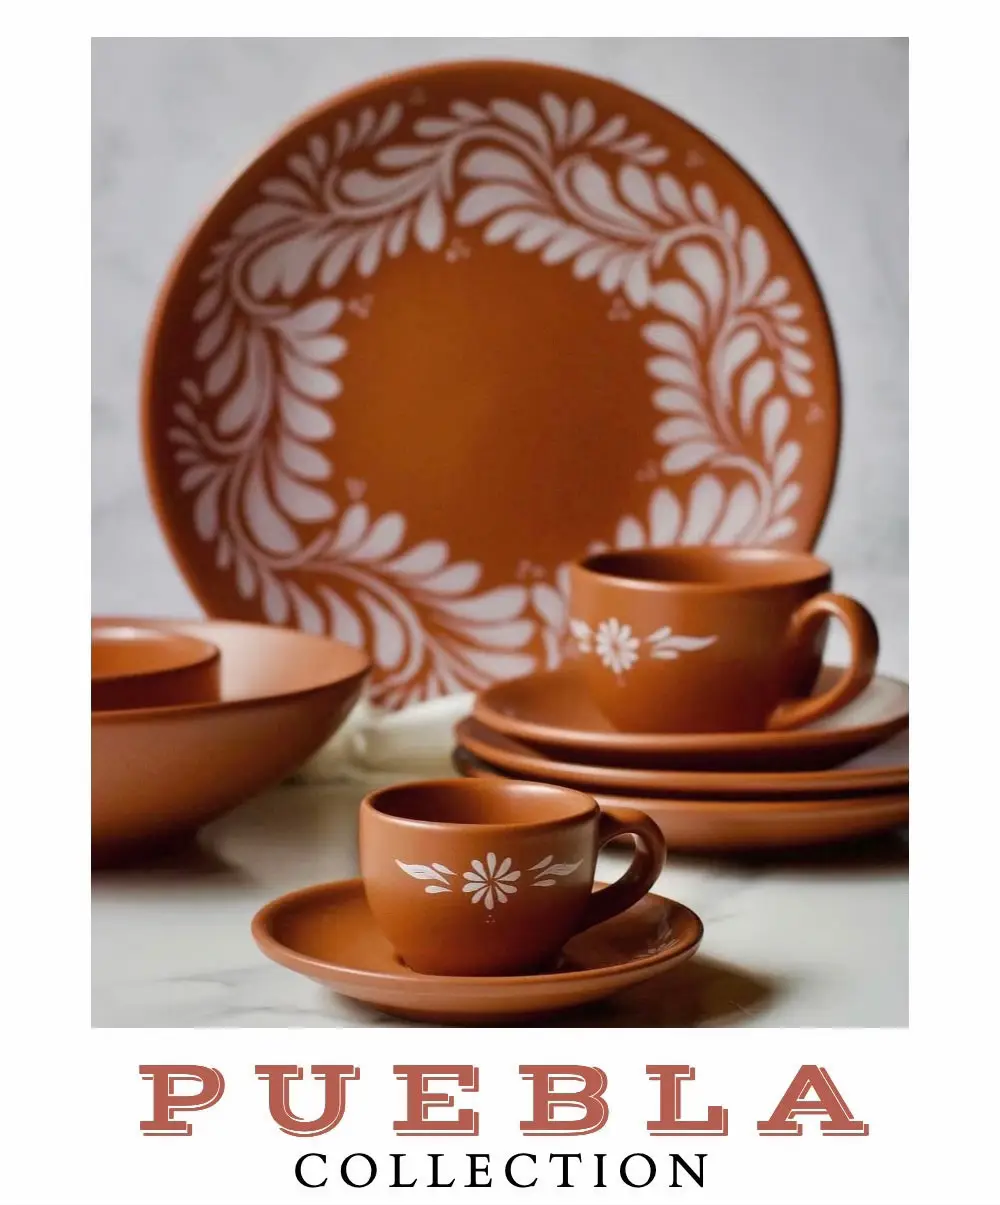 Mexican Porcelain 20-Piece Dinnerware Set & also sold by individual pieces.  It was created by 100% MeXican Artisans & talented brushwork on a warm, traditional but resistant color, terracotta/mud.The Mud color together with the Ivory-tone applications make this tableware an incomparable combination. Its body is made of strong and resistant vitrified porcelain, just like the good Mexican that it is! We want you to adopt it with love and become a favorite tableware for your tables & Celebrations! Ideal for restaurants, hotels and banquets that look for that distinctive and Mexican touch. For all of us who are proud of artisan work and our Mexican culture, we trust that you will love it. PRODUCT DETAILS Made of porcelain. Hand glazed. Made in Mexico. Set of 20; 4 dinner plates, 4 salad plates, 4 bowls,4 coffee plates, and 4 mugs. Food, oven, microwave and dishwasher safe. While dishes are microwave and oven safe, they may become hot. Handle carefully. INCLUDED Dinner Plate: 10.6